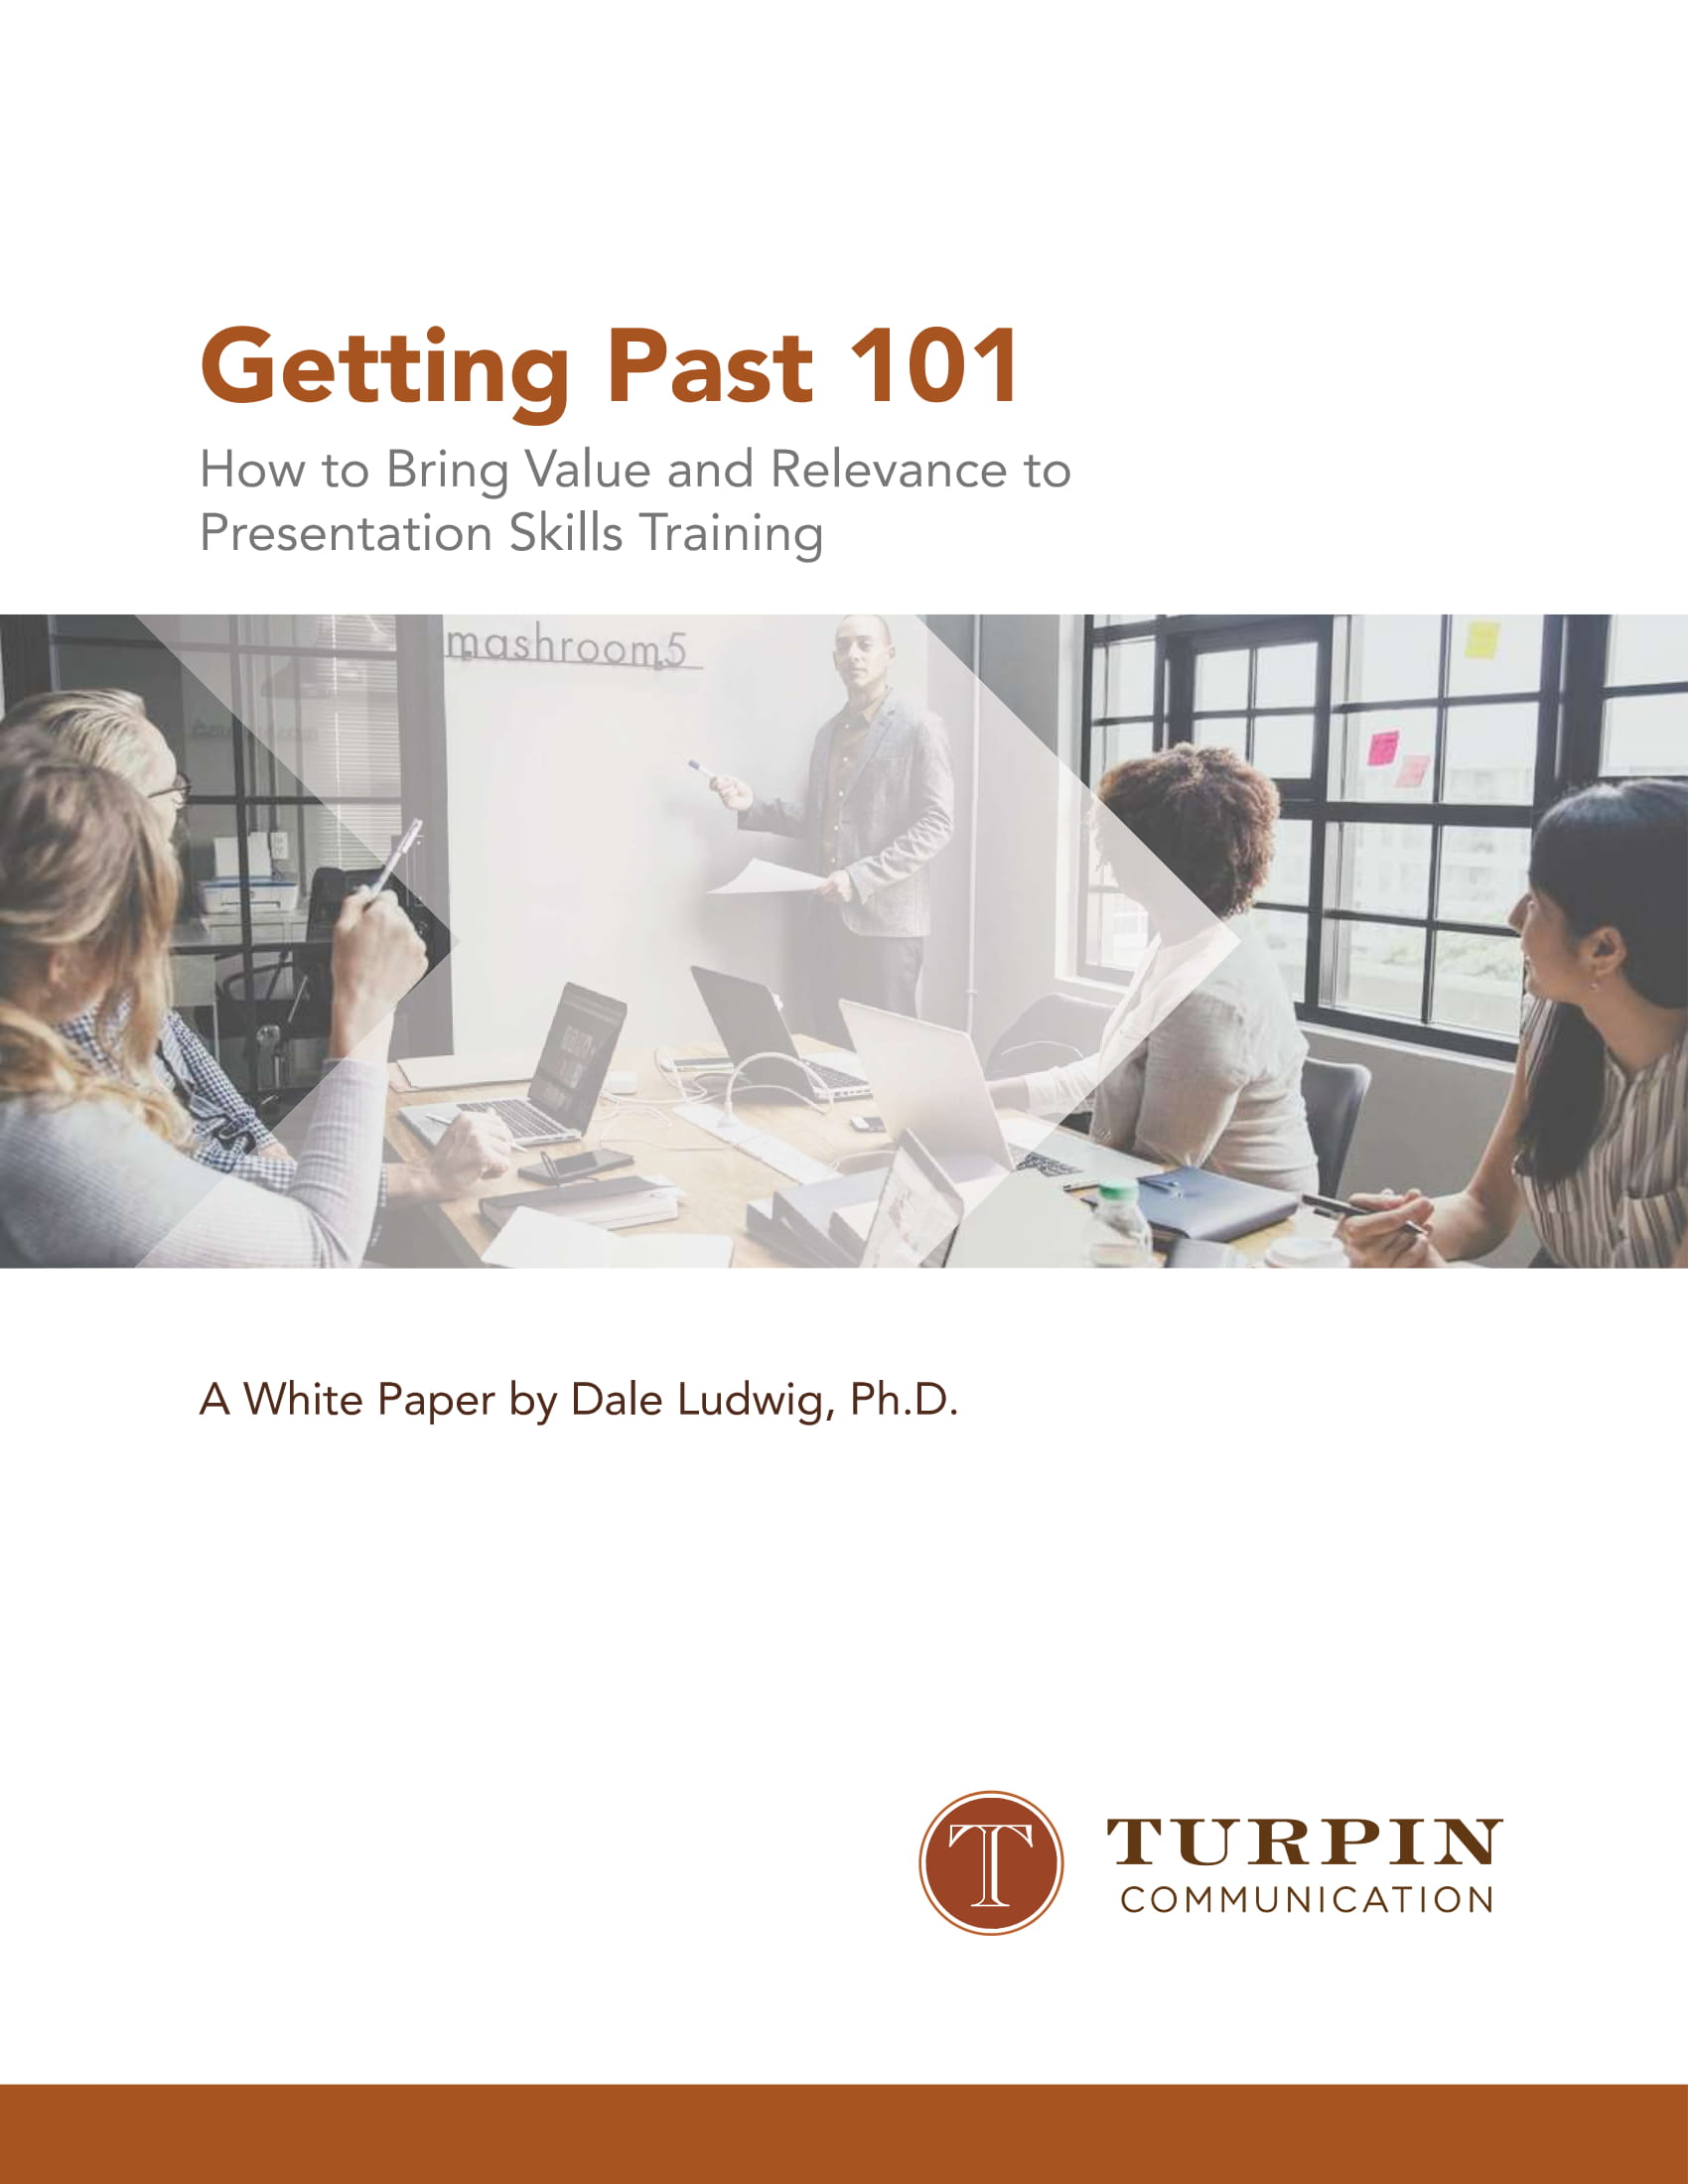 Getting Past 101: How to Bring Value and Relevance to Presentation Skills Training